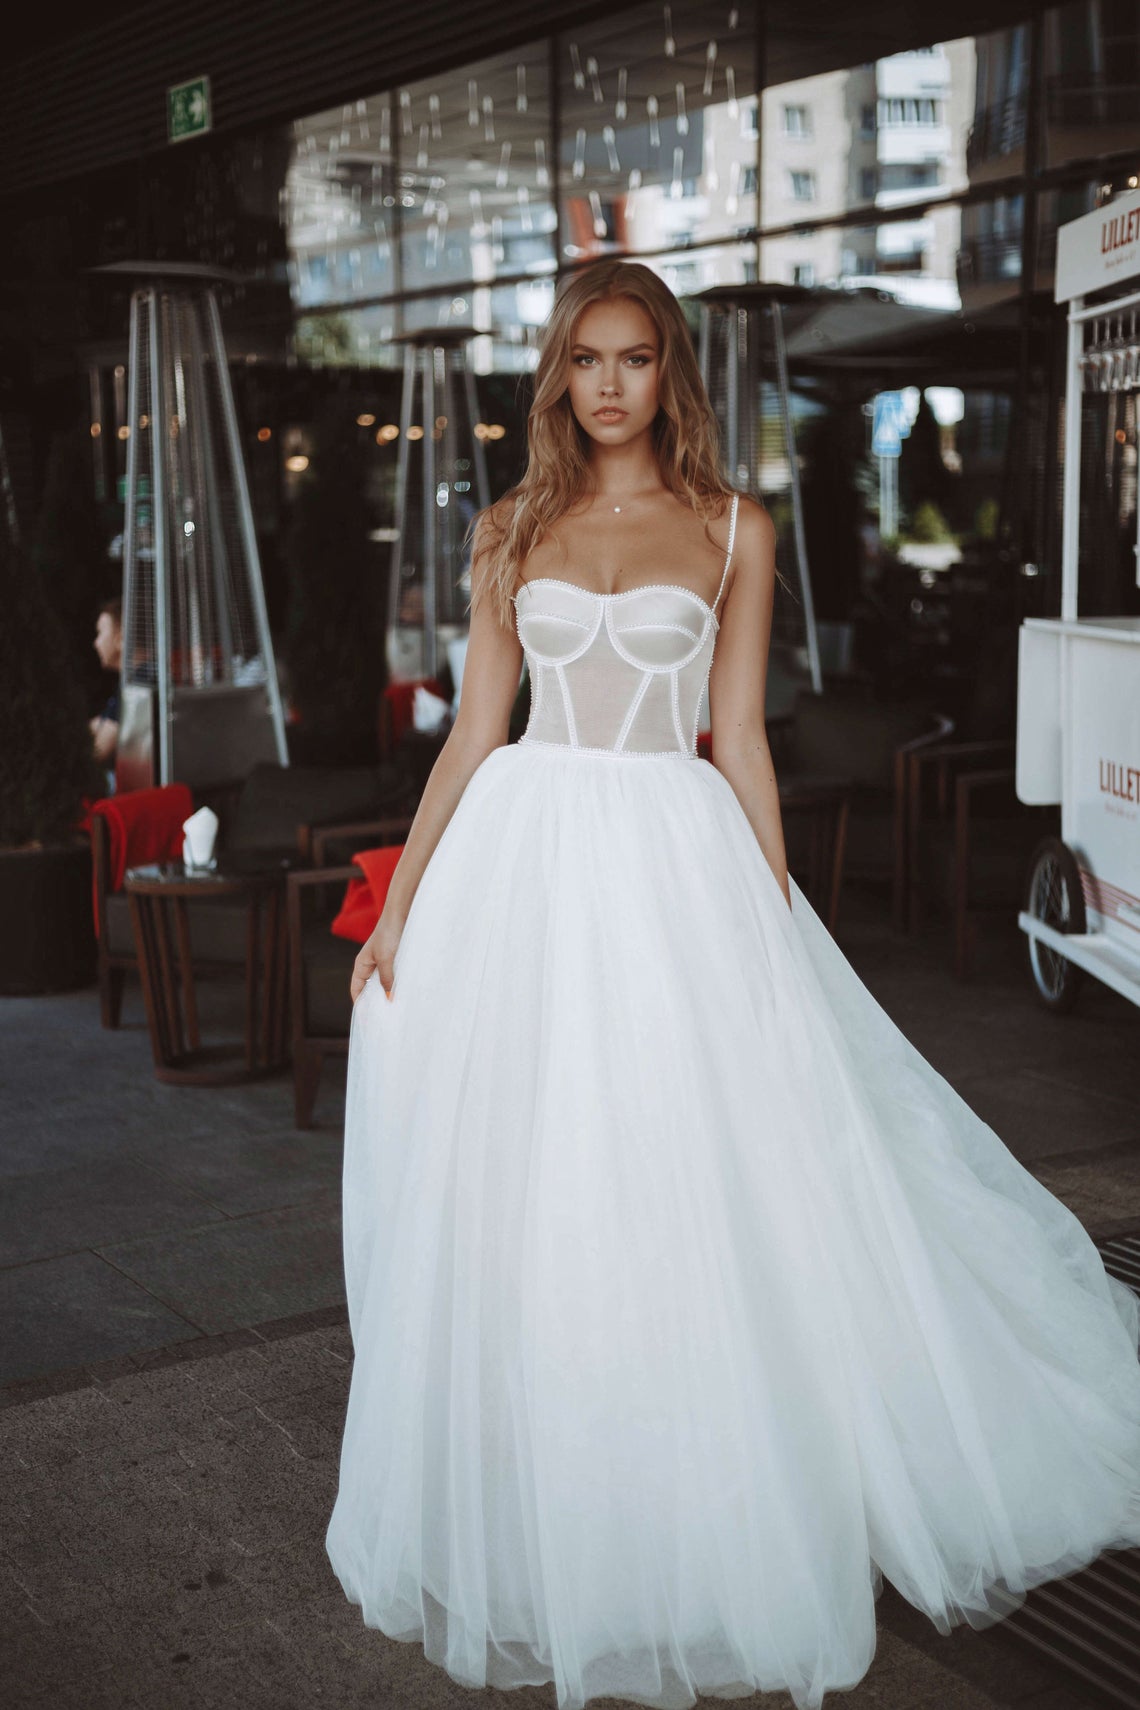 Rara Avis elegant A-line wedding dress Yang with the tulle skirt and fitted bodice with the sweetheart neckline and pearls decorations at Dell"Amore Bridal, NZ.4